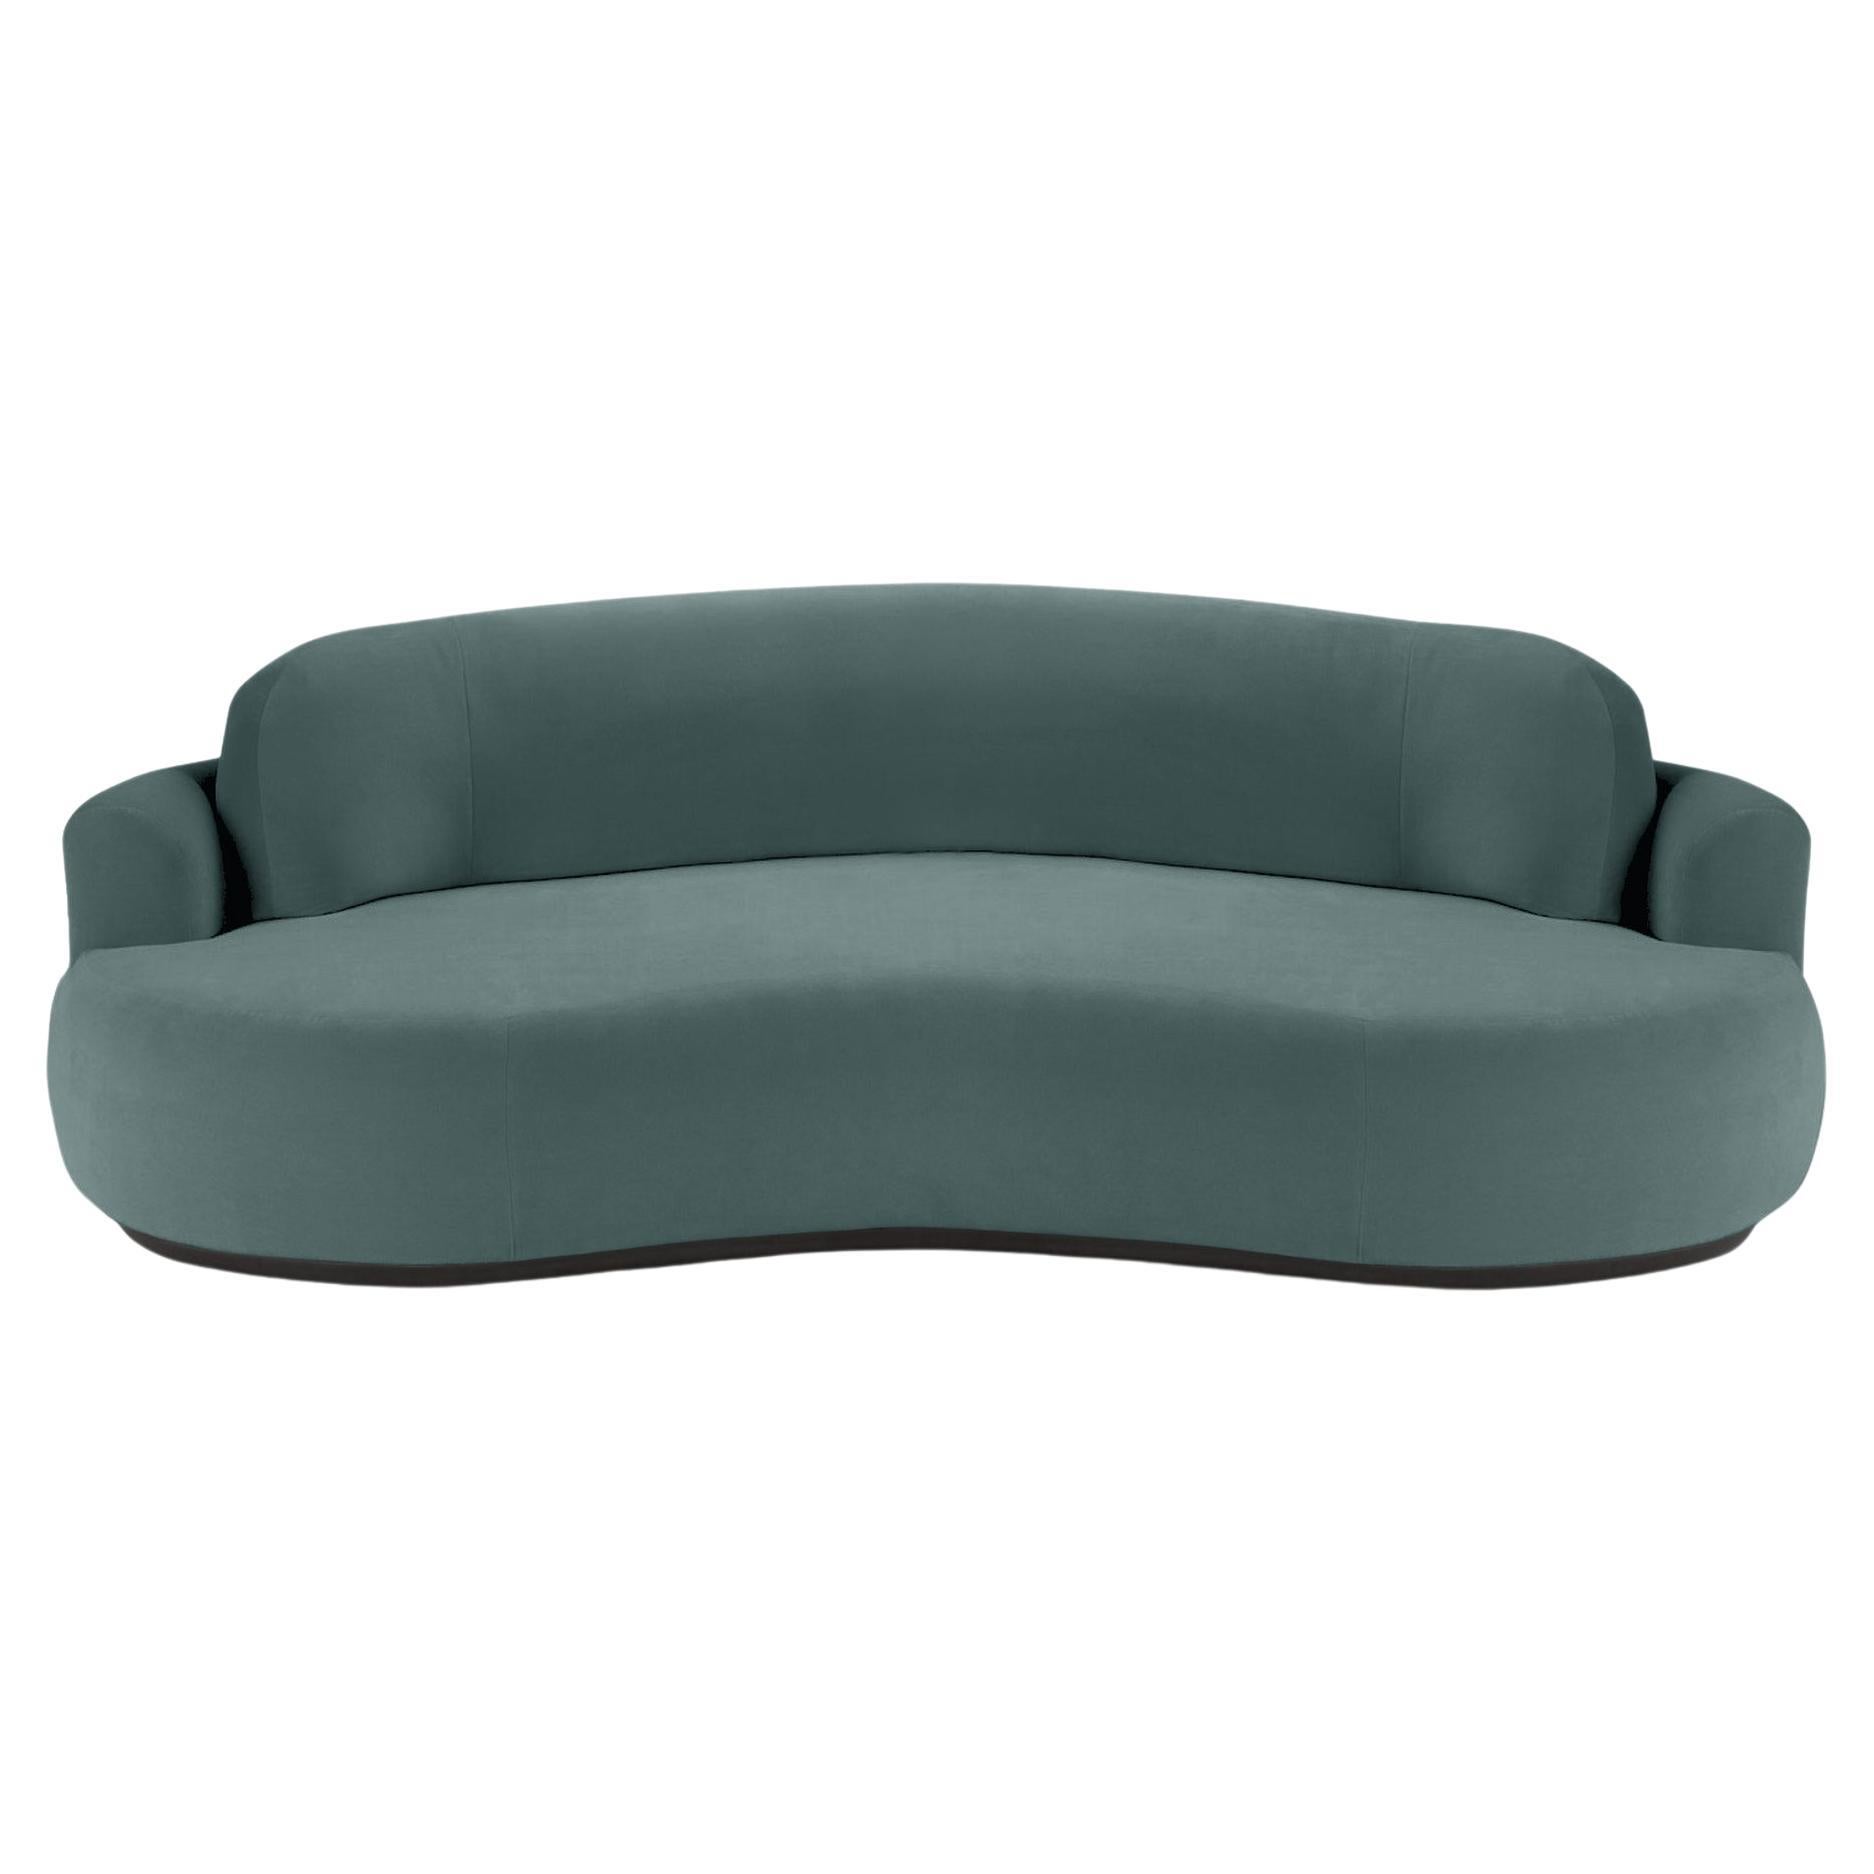 Naked Round Sofa, Large with Beech Ash-056-5 and Teal For Sale